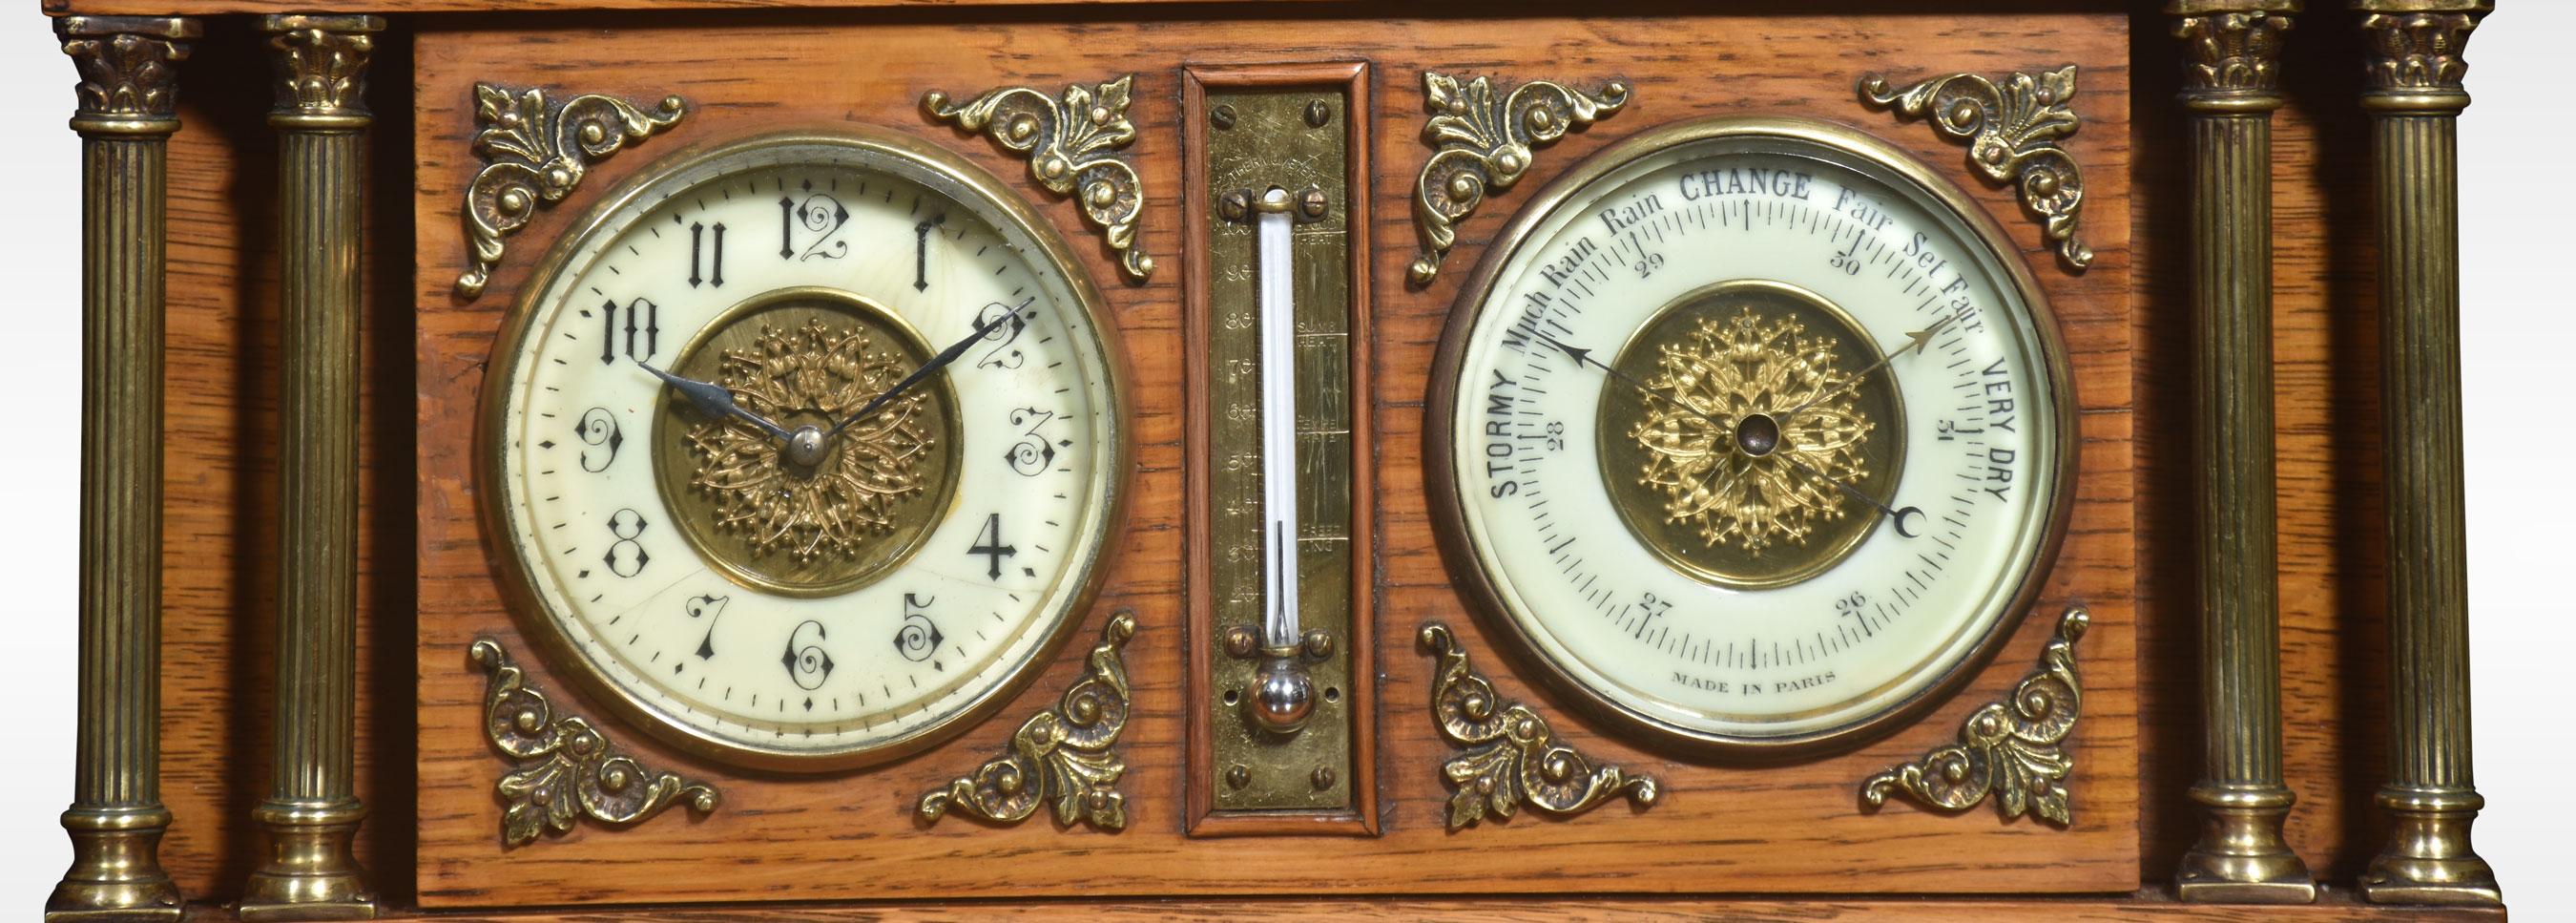 Oak architectural desk clock and barometer, of temple form with ceramic dials, centred with a thermometer and within double Corinthian brass columns. All raised up on a stepped base.
Dimensions
Height 10 Inches
Width 17 Inches
Depth 4 Inches